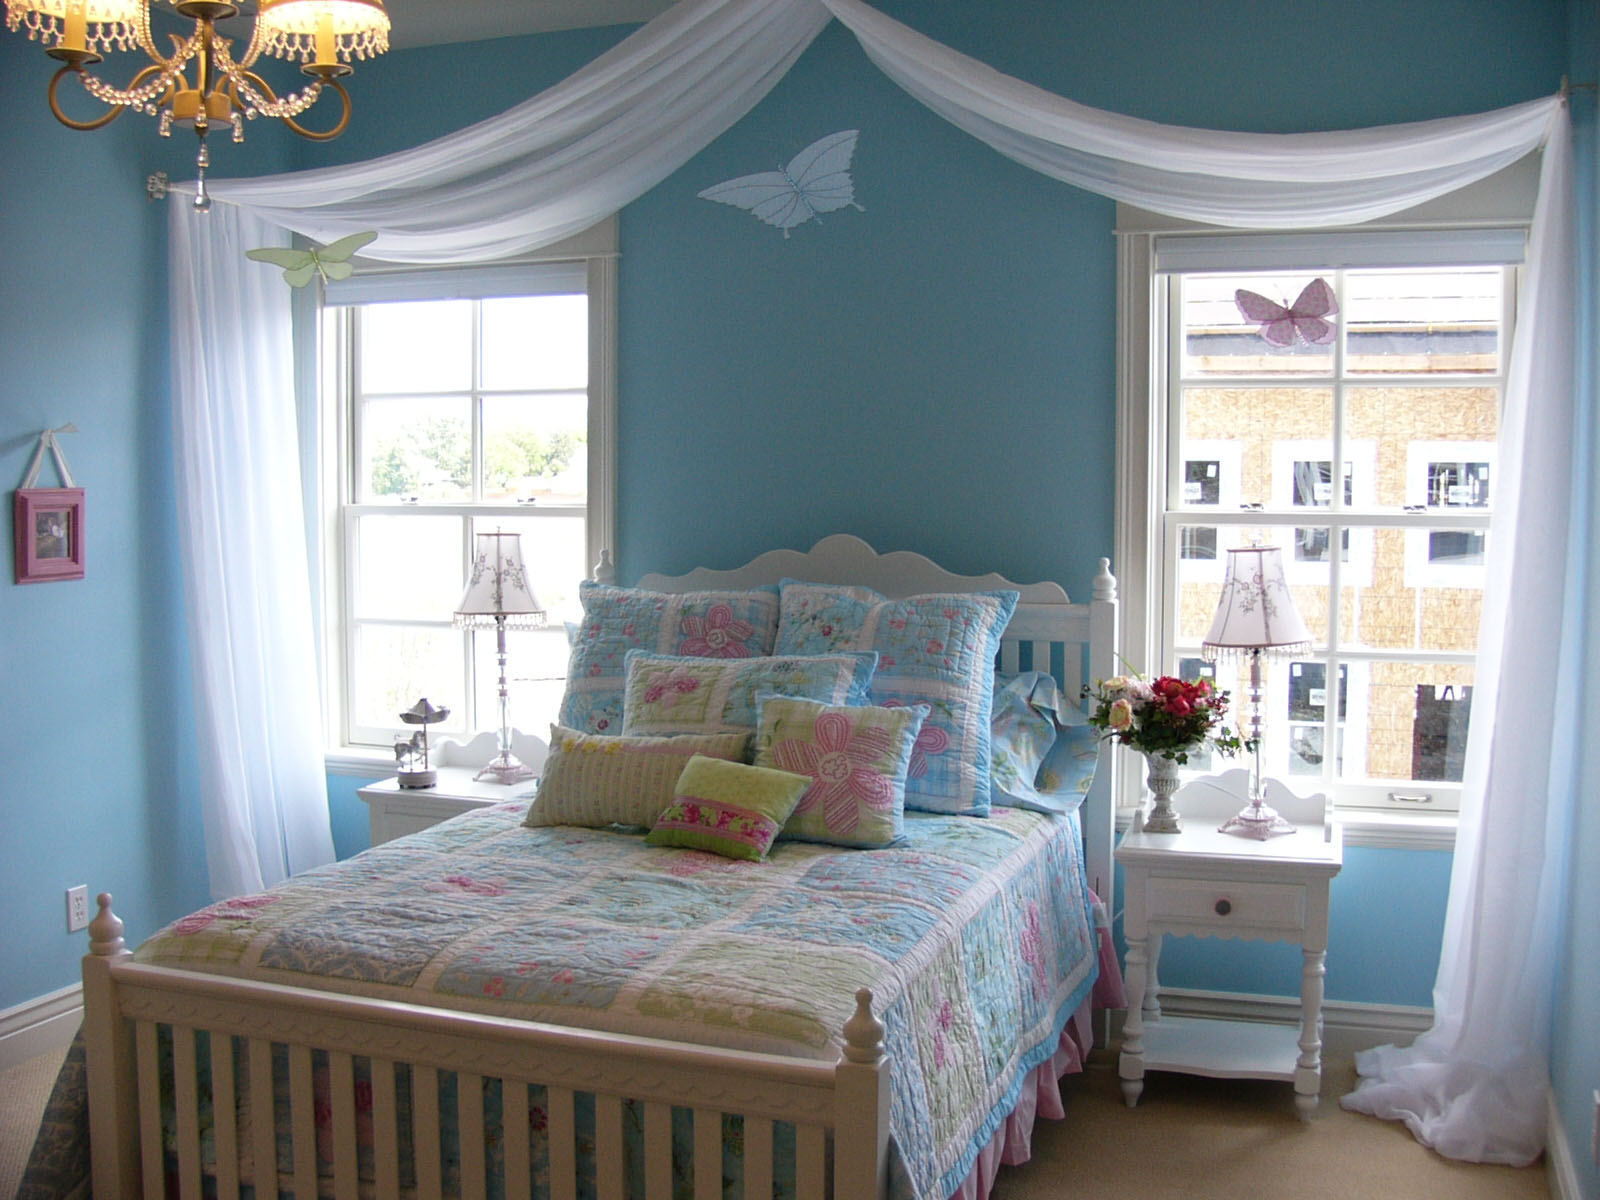 Blue Accent For Appealing Blue Accent Wall Color For Girls Bedroom Ideas Combined With White Room Curtains Furnished With Bed Between Twin Nightstands And Completed By Night Lamps Girls Bedroom Ideas: The Orchid Touch